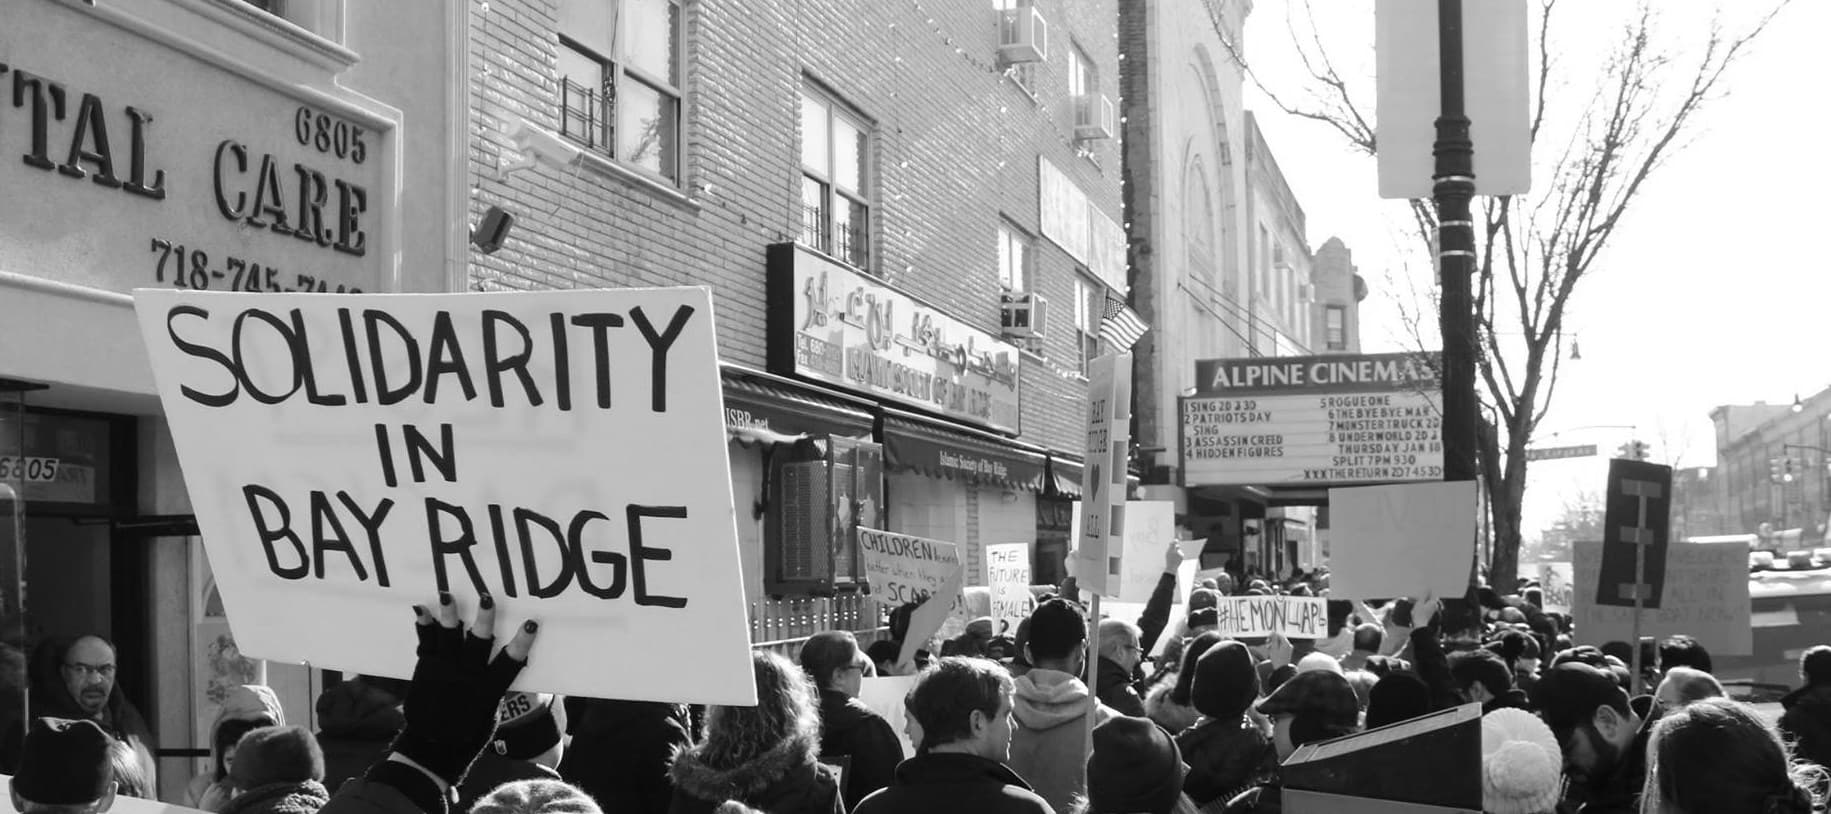 Activists rally at the start of the Martin Luther King, Jr. Day March for Visibility Against Hate in Bay Ridge